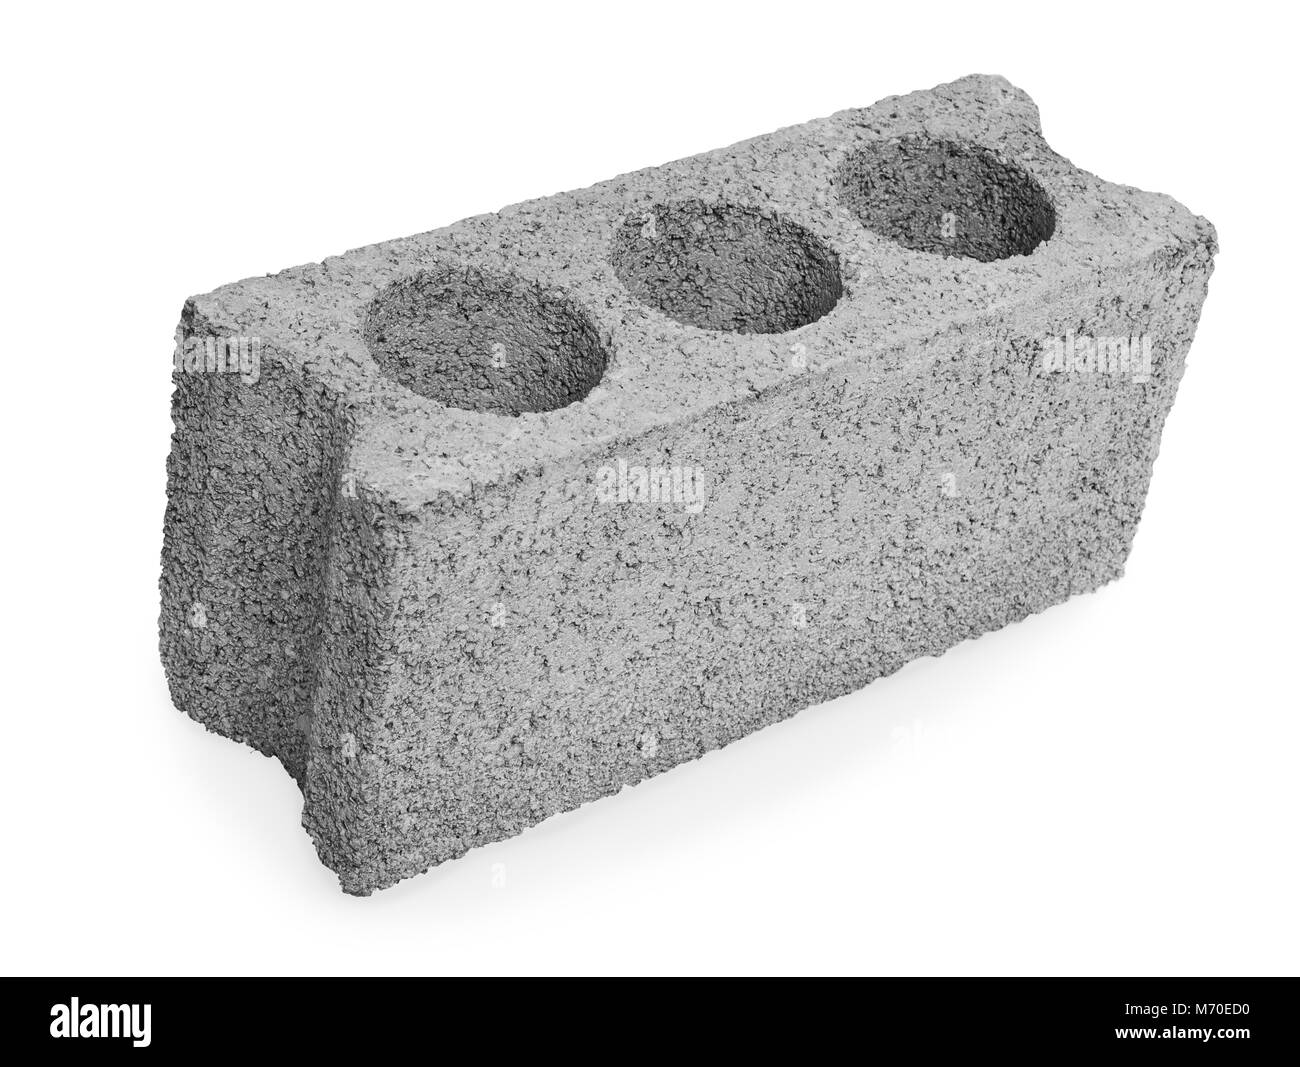 Concrete hollow block construction on a white background Stock ...